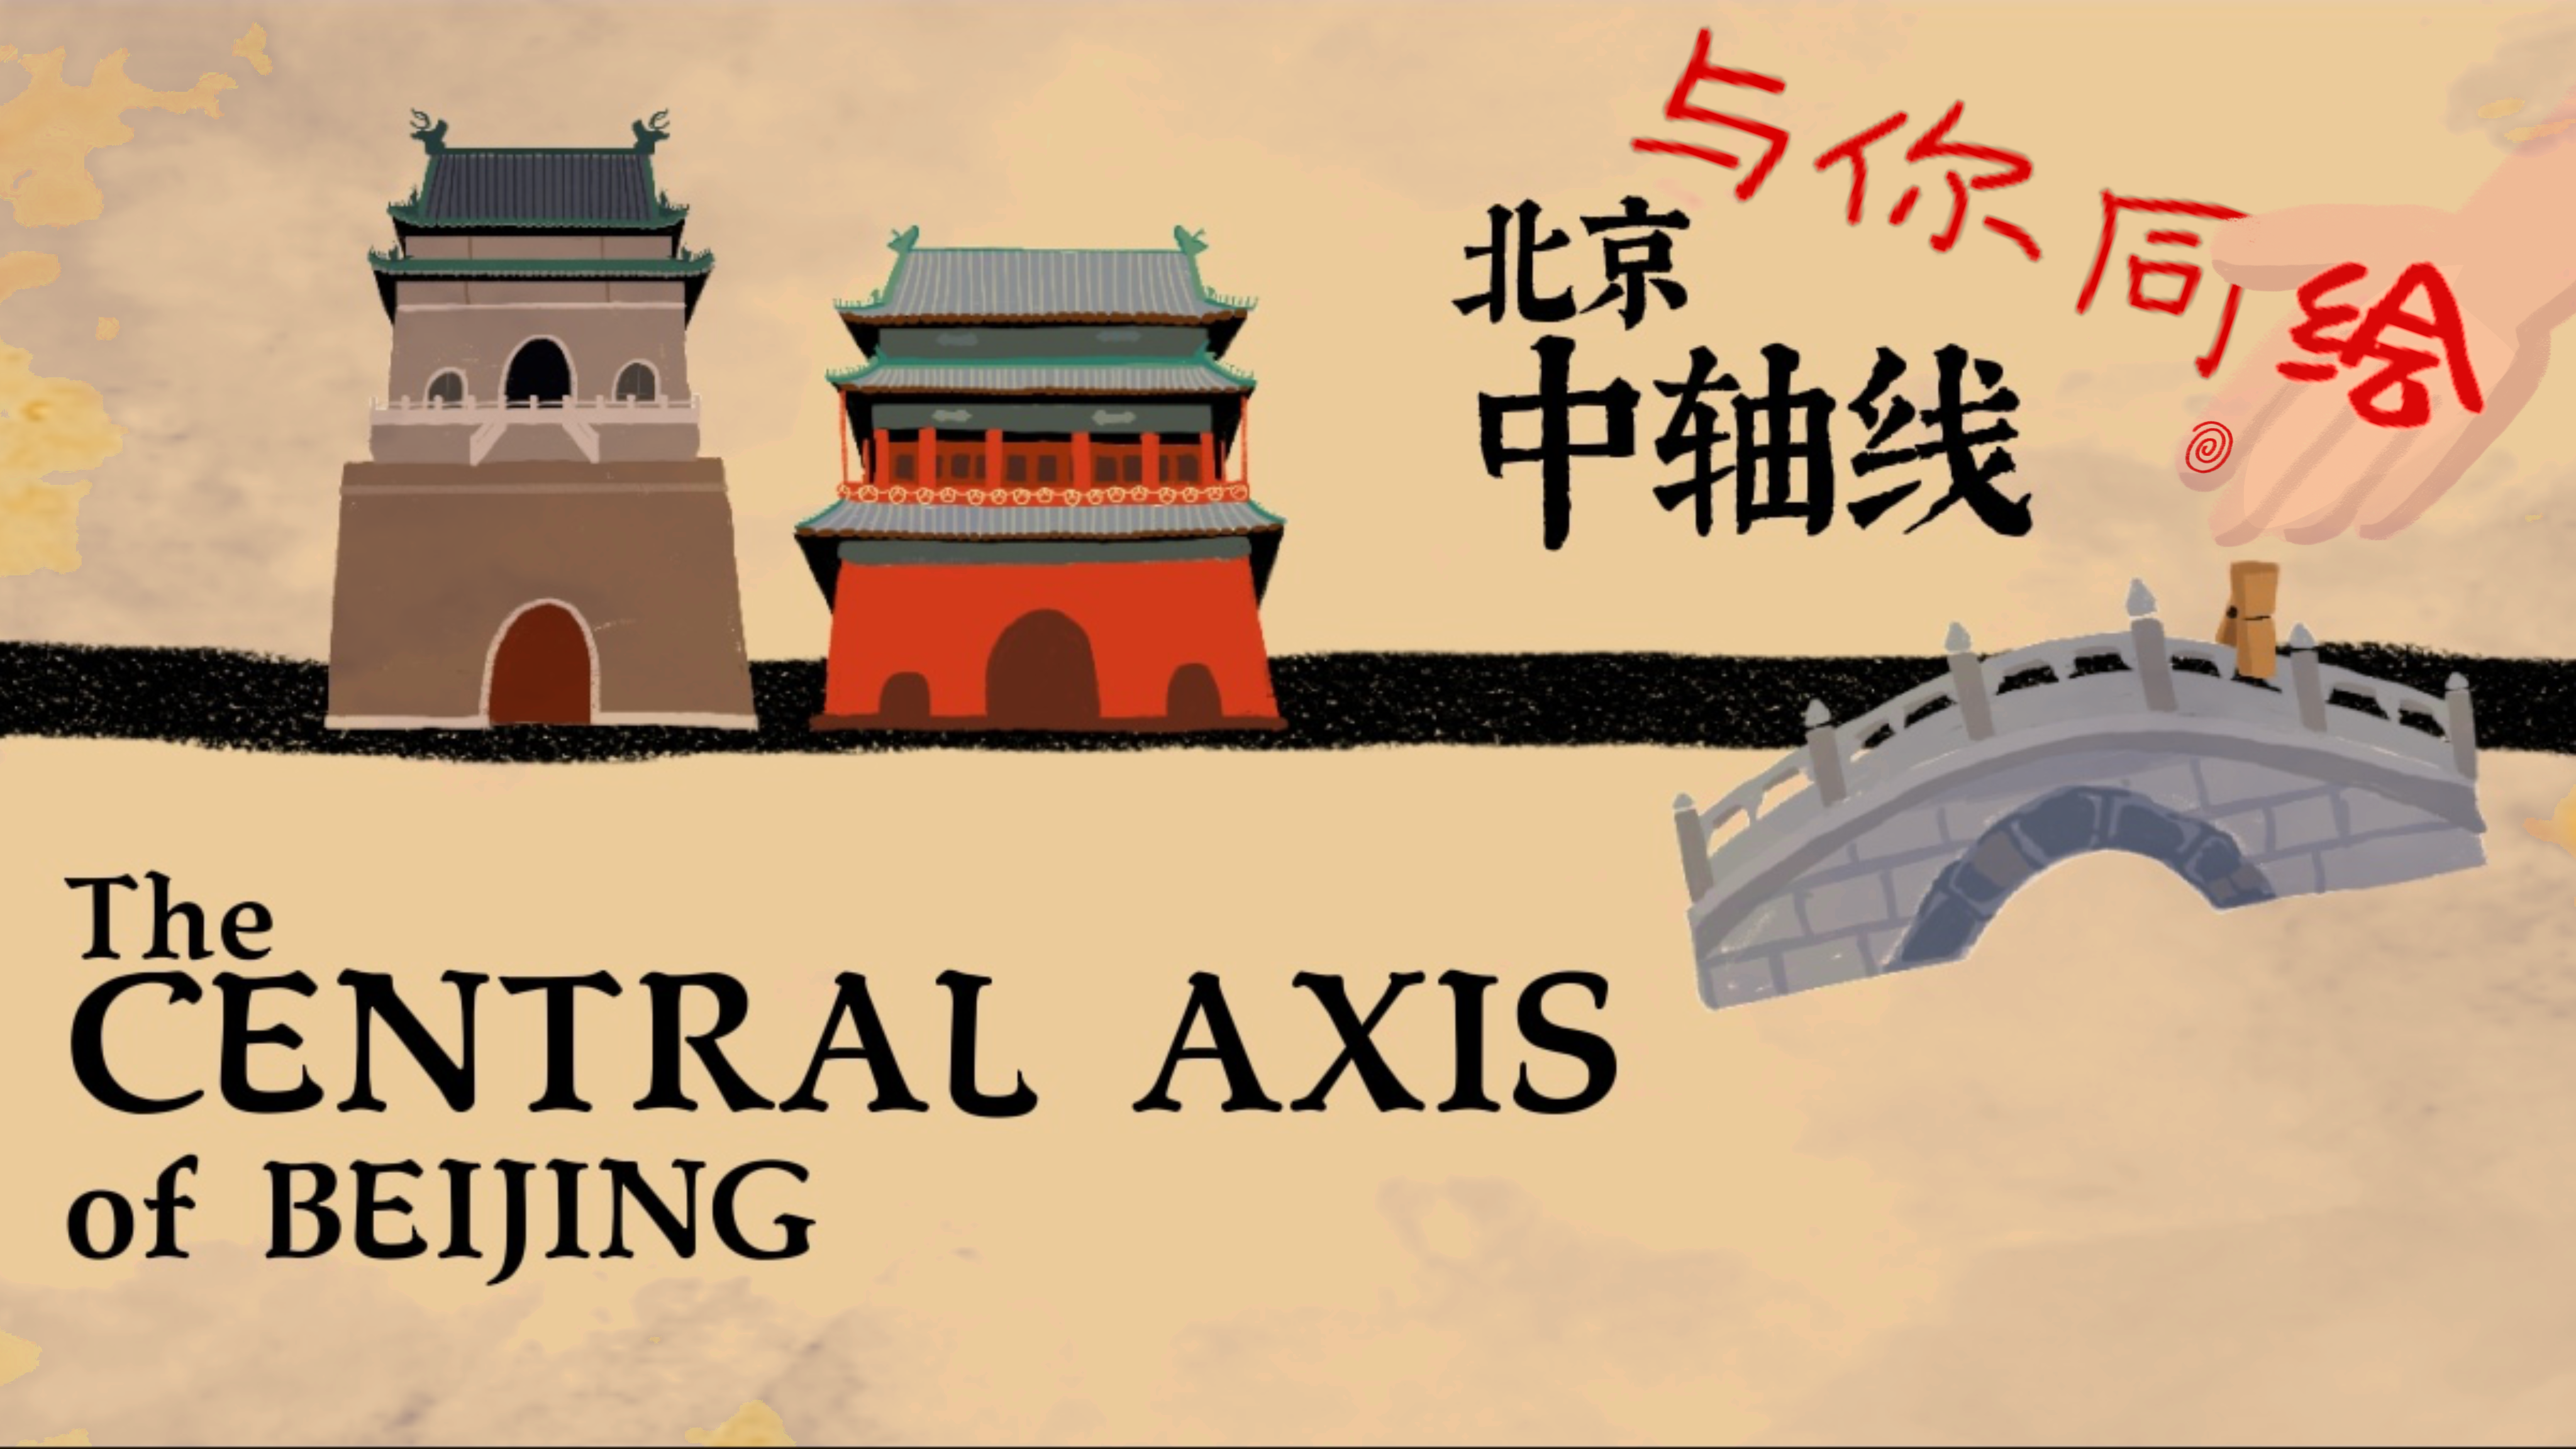 Draw the central axis of Beijing with you